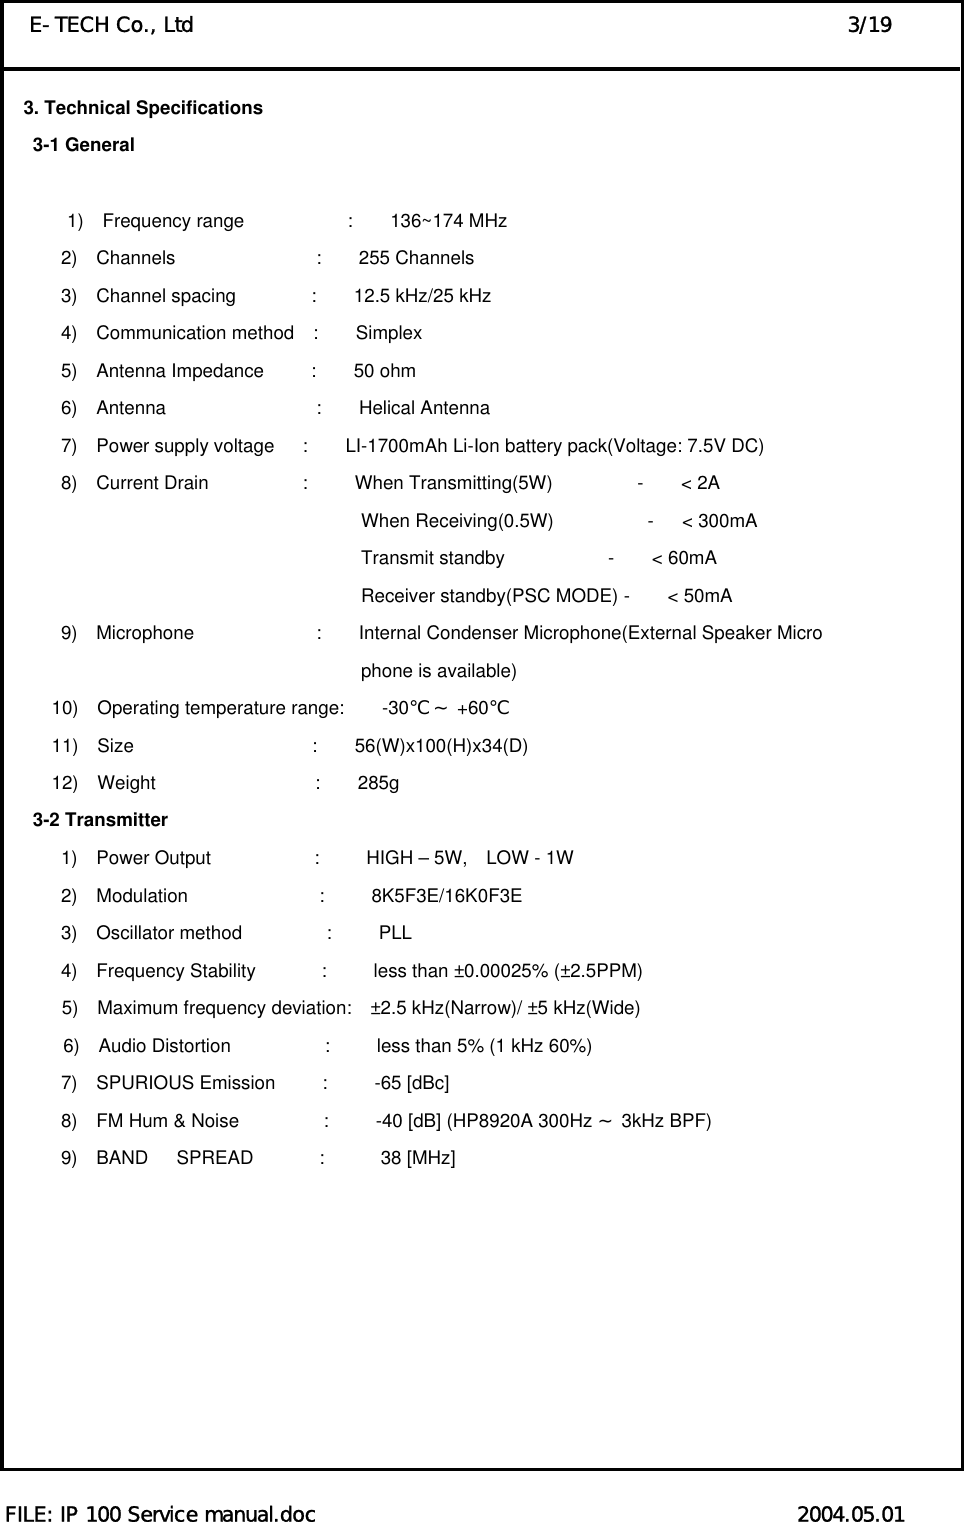  FILE: IP 100 Service manual.doc                                               2004.05.01 E-TECH Co., Ltd                                                                3/19 3. Technical Specifications    3-1 General          1)  Frequency range           :    136~174 MHz 2)  Channels               :    255 Channels 3)  Channel spacing        :    12.5 kHz/25 kHz 4)  Communication method  :    Simplex 5)  Antenna Impedance     :    50 ohm  6)  Antenna                :    Helical Antenna 7)  Power supply voltage   :    LI-1700mAh Li-Ion battery pack(Voltage: 7.5V DC) 8)  Current Drain          :     When Transmitting(5W)         -    &lt; 2A                                       When Receiving(0.5W)          -   &lt; 300mA                                       Transmit standby           -    &lt; 60mA                                       Receiver standby(PSC MODE) -    &lt; 50mA 9)  Microphone             :    Internal Condenser Microphone(External Speaker Micro                                 phone is available)       10)  Operating temperature range:    -30    +℃～ 60℃      11)  Size                   :    56(W)x100(H)x34(D)      12)  Weight                 :    285g    3-2 Transmitter       1)  Power Output           :     HIGH – 5W,  LOW - 1W       2)  Modulation              :     8K5F3E/16K0F3E       3)  Oscillator method         :     PLL       4)  Frequency Stability       :     less than ±0.00025% (±2.5PPM) 5)  Maximum frequency deviation:  ±2.5 kHz(Narrow)/ ±5 kHz(Wide) 6)  Audio Distortion          :     less than 5% (1 kHz 60%)       7)  SPURIOUS Emission     :     -65 [dBc]       8)  FM Hum &amp; Noise         :     -40 [dB] (HP8920A 300Hz   3kHz BP～F)        9)  BAND   SPREAD       :      38 [MHz]         